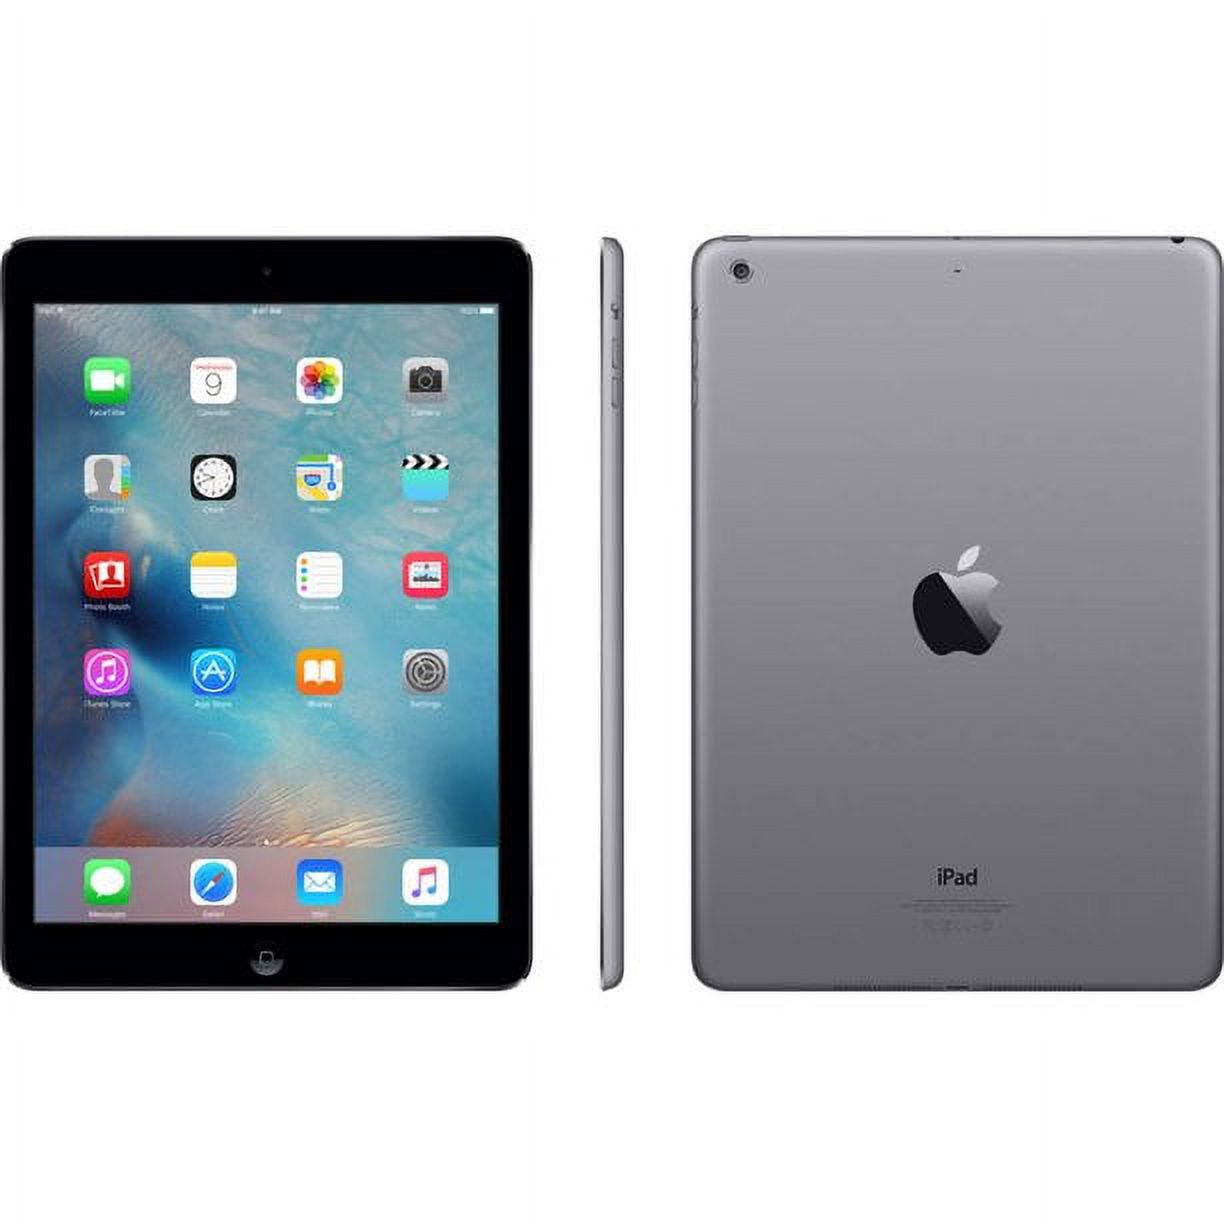 Restored Apple iPad Air 9.7" Retina Display 32GB WiFi Tablet - Space Gray - MD786LL/A (Refurbished) - image 1 of 5